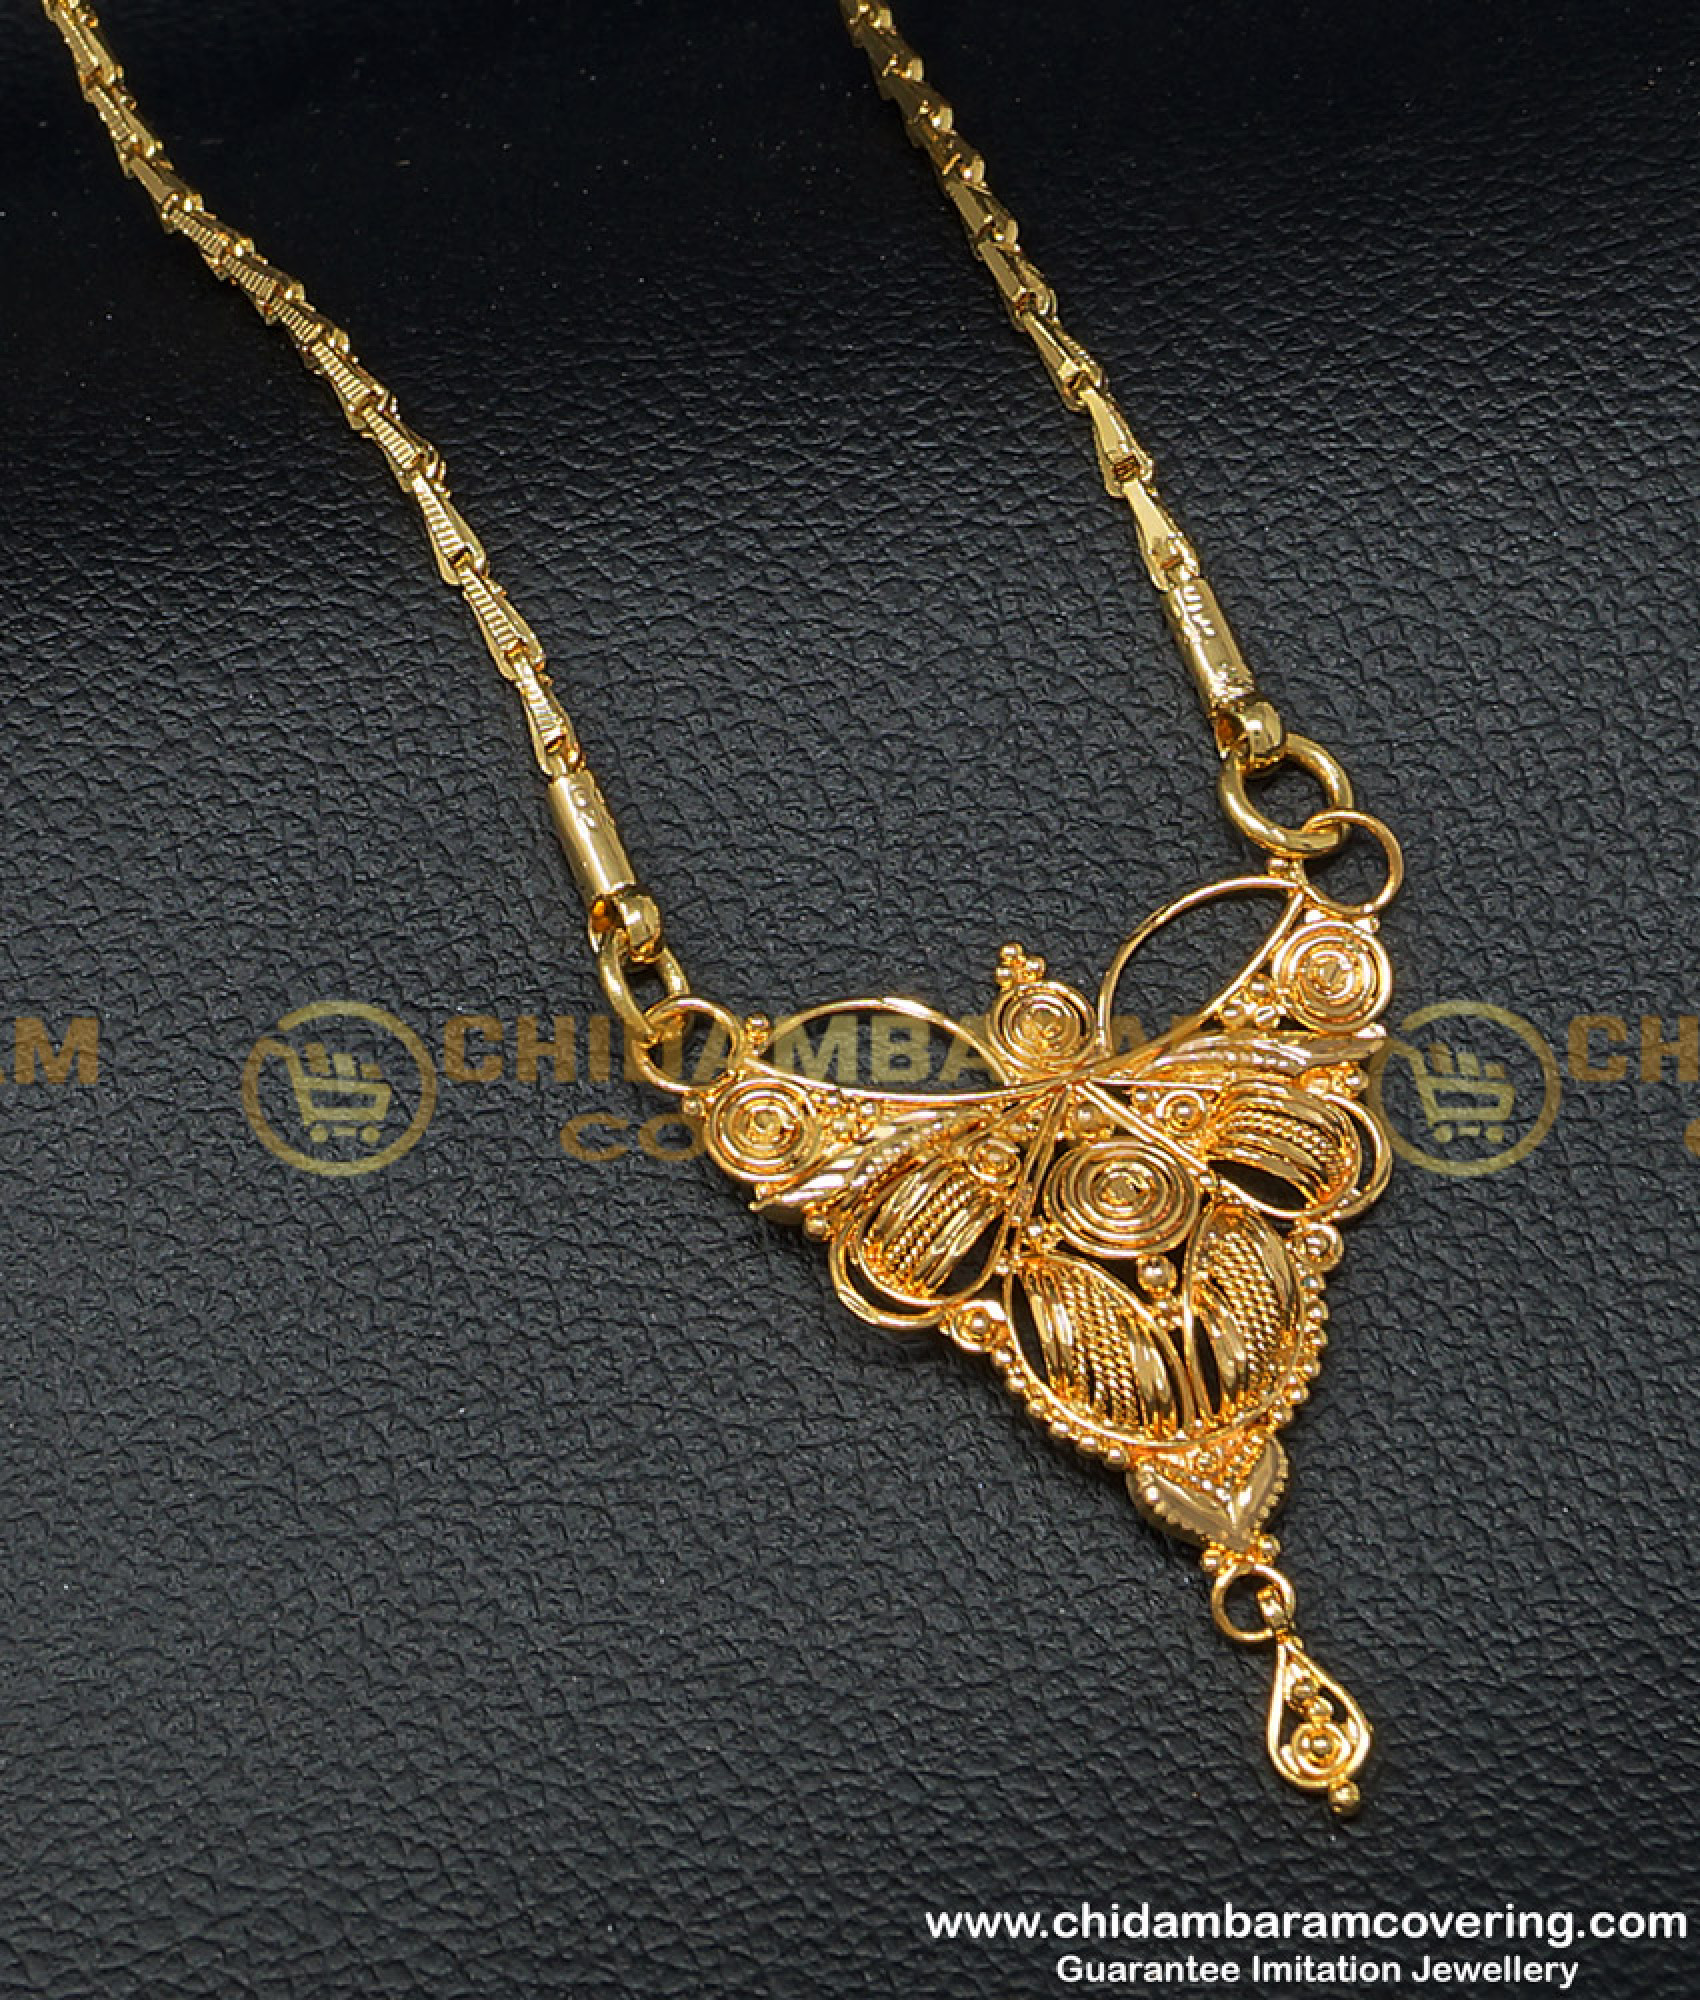 Buy Traditional Daily Wear Guaranteed Gold Covering Chain with Design ...